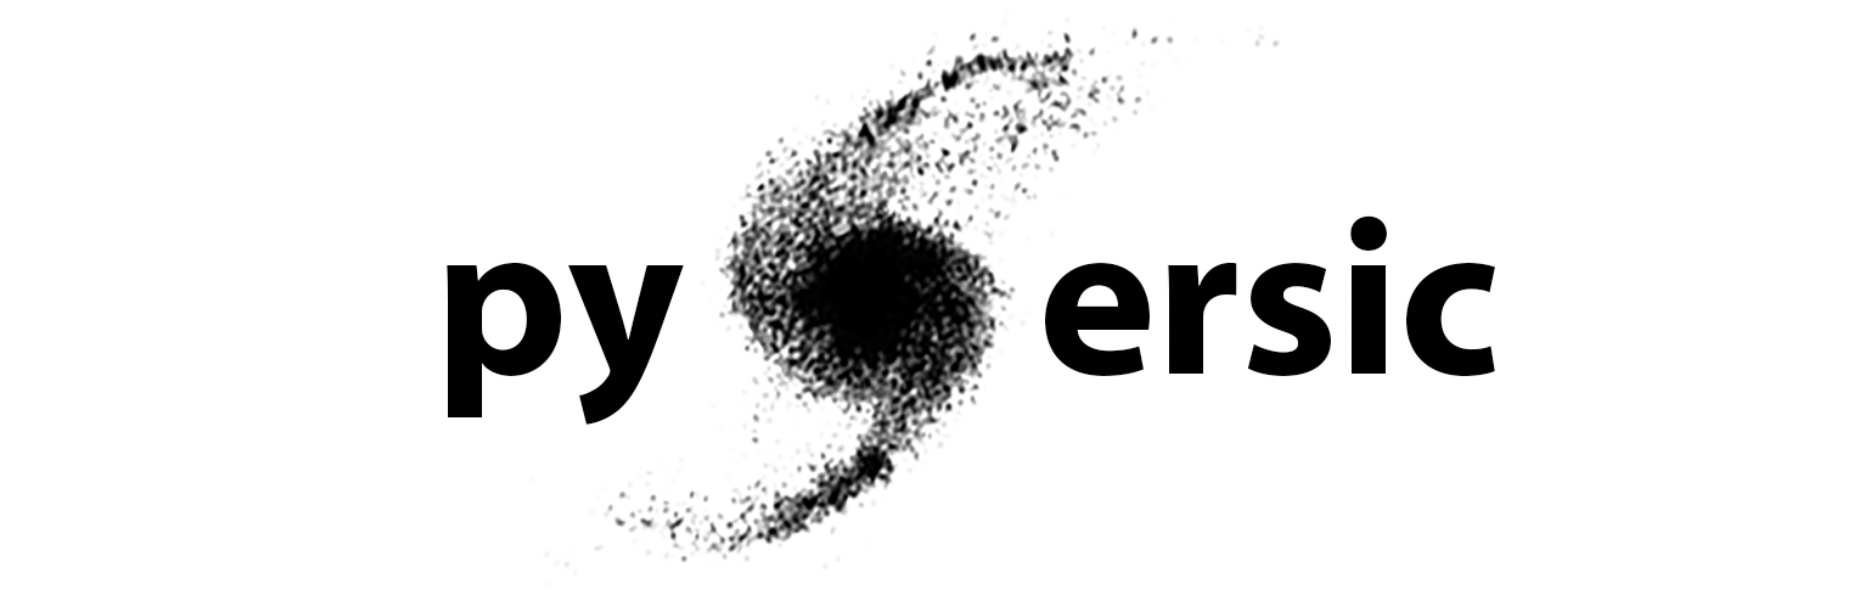 pysersic logo featuring a spiral s-galaxy as the S